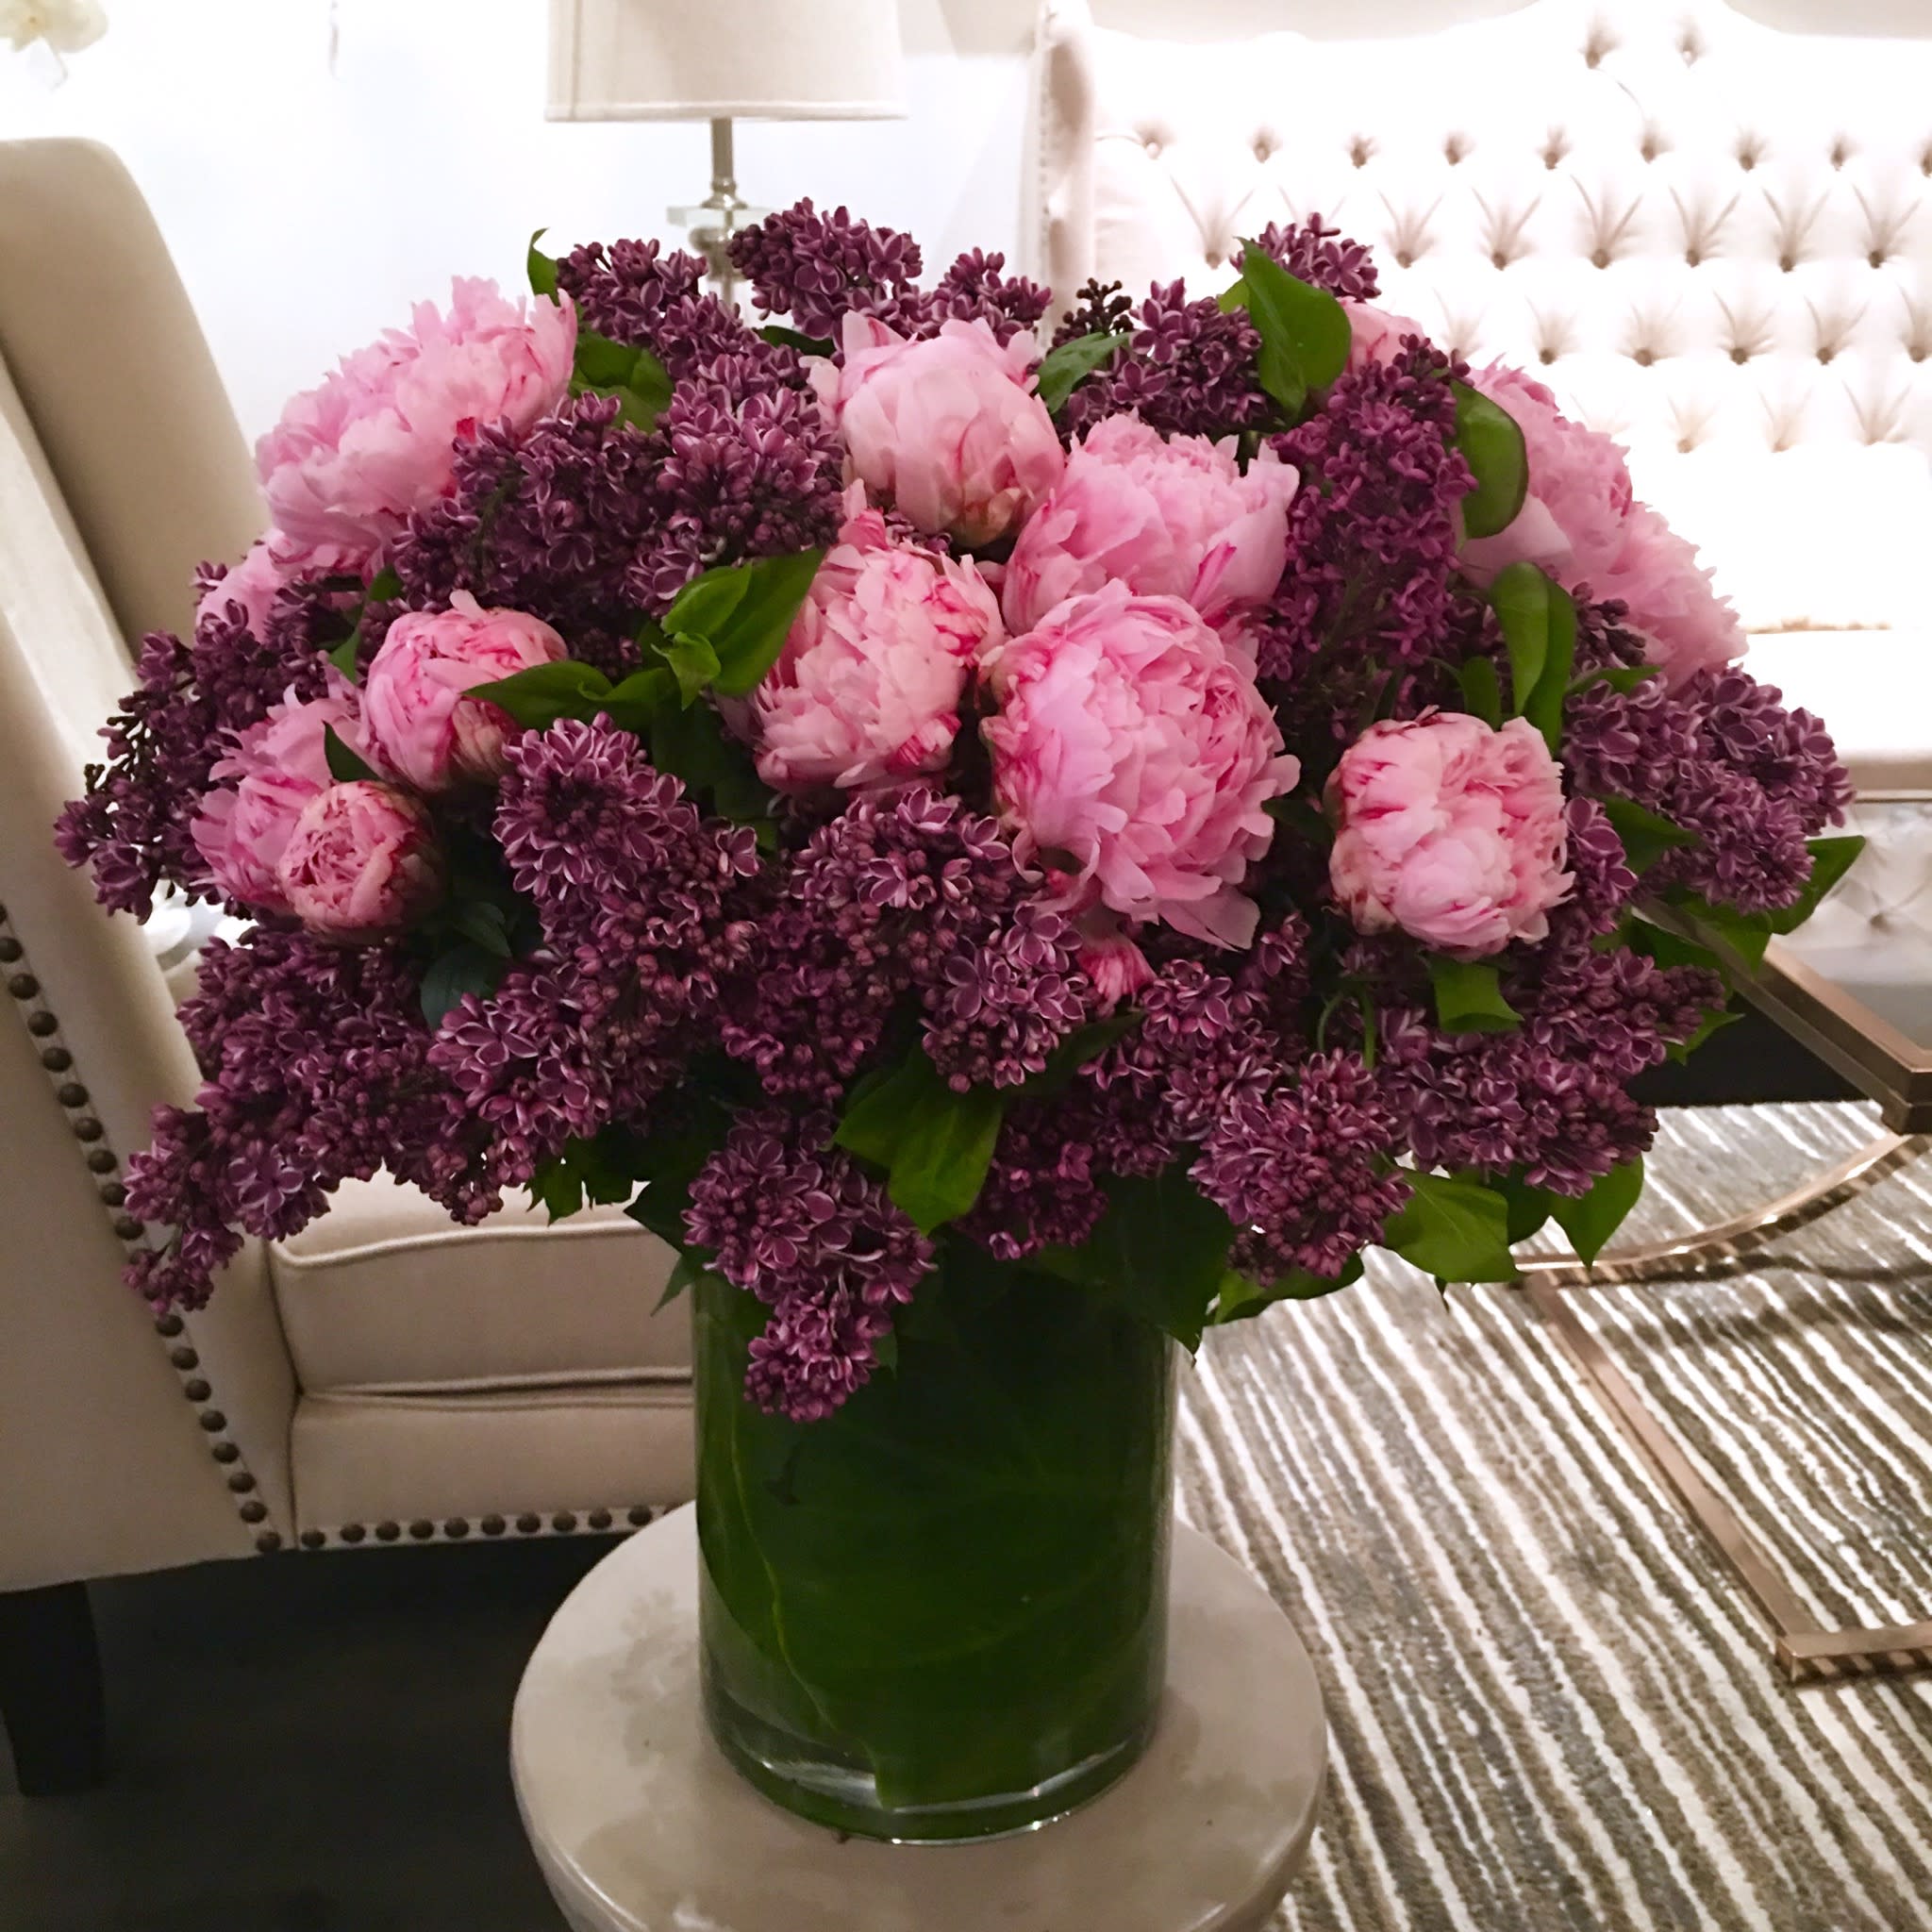 Mother's Love - As grand and sweet as a mother's love. This is an arrangement that will send a fragrant gesture that's sure to show just how big your love is. A large arrangement that stands in a large leaf-lined vase. and filled to the brim with aromatic lavender lilacs, and perfectly pink peonies. Send to yourself to enjoy (and smell!) or to someone you really want to show how much you appreciate them!  If you would like a scaled down version of this arrangement, no problem! Call us and let us know how we can customize this for you.